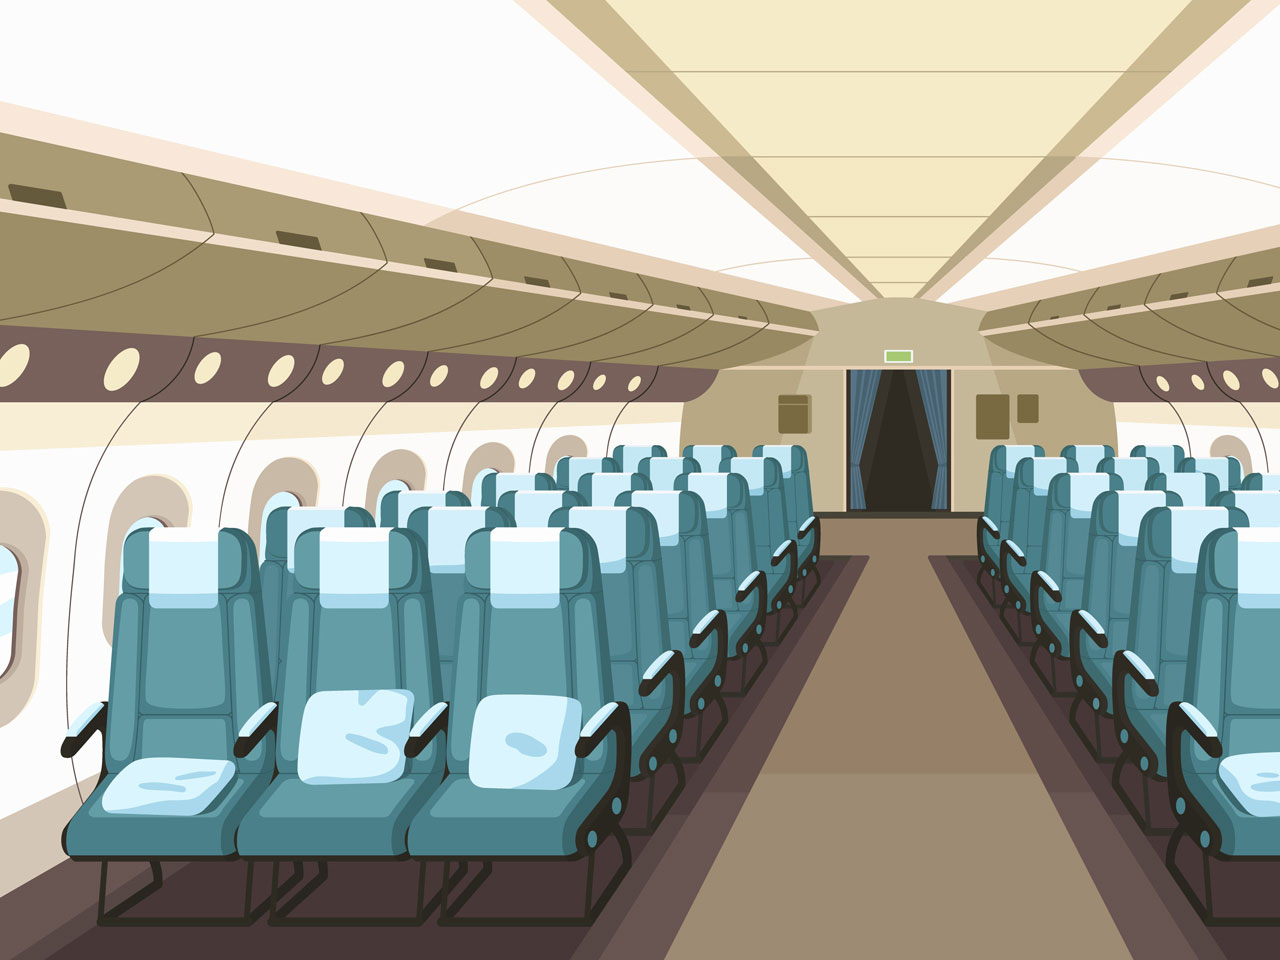 Front view aeroplane interior design with aisle reclining seats portholes empty aircraft cabin economy class inside modern plane colored flat illustration